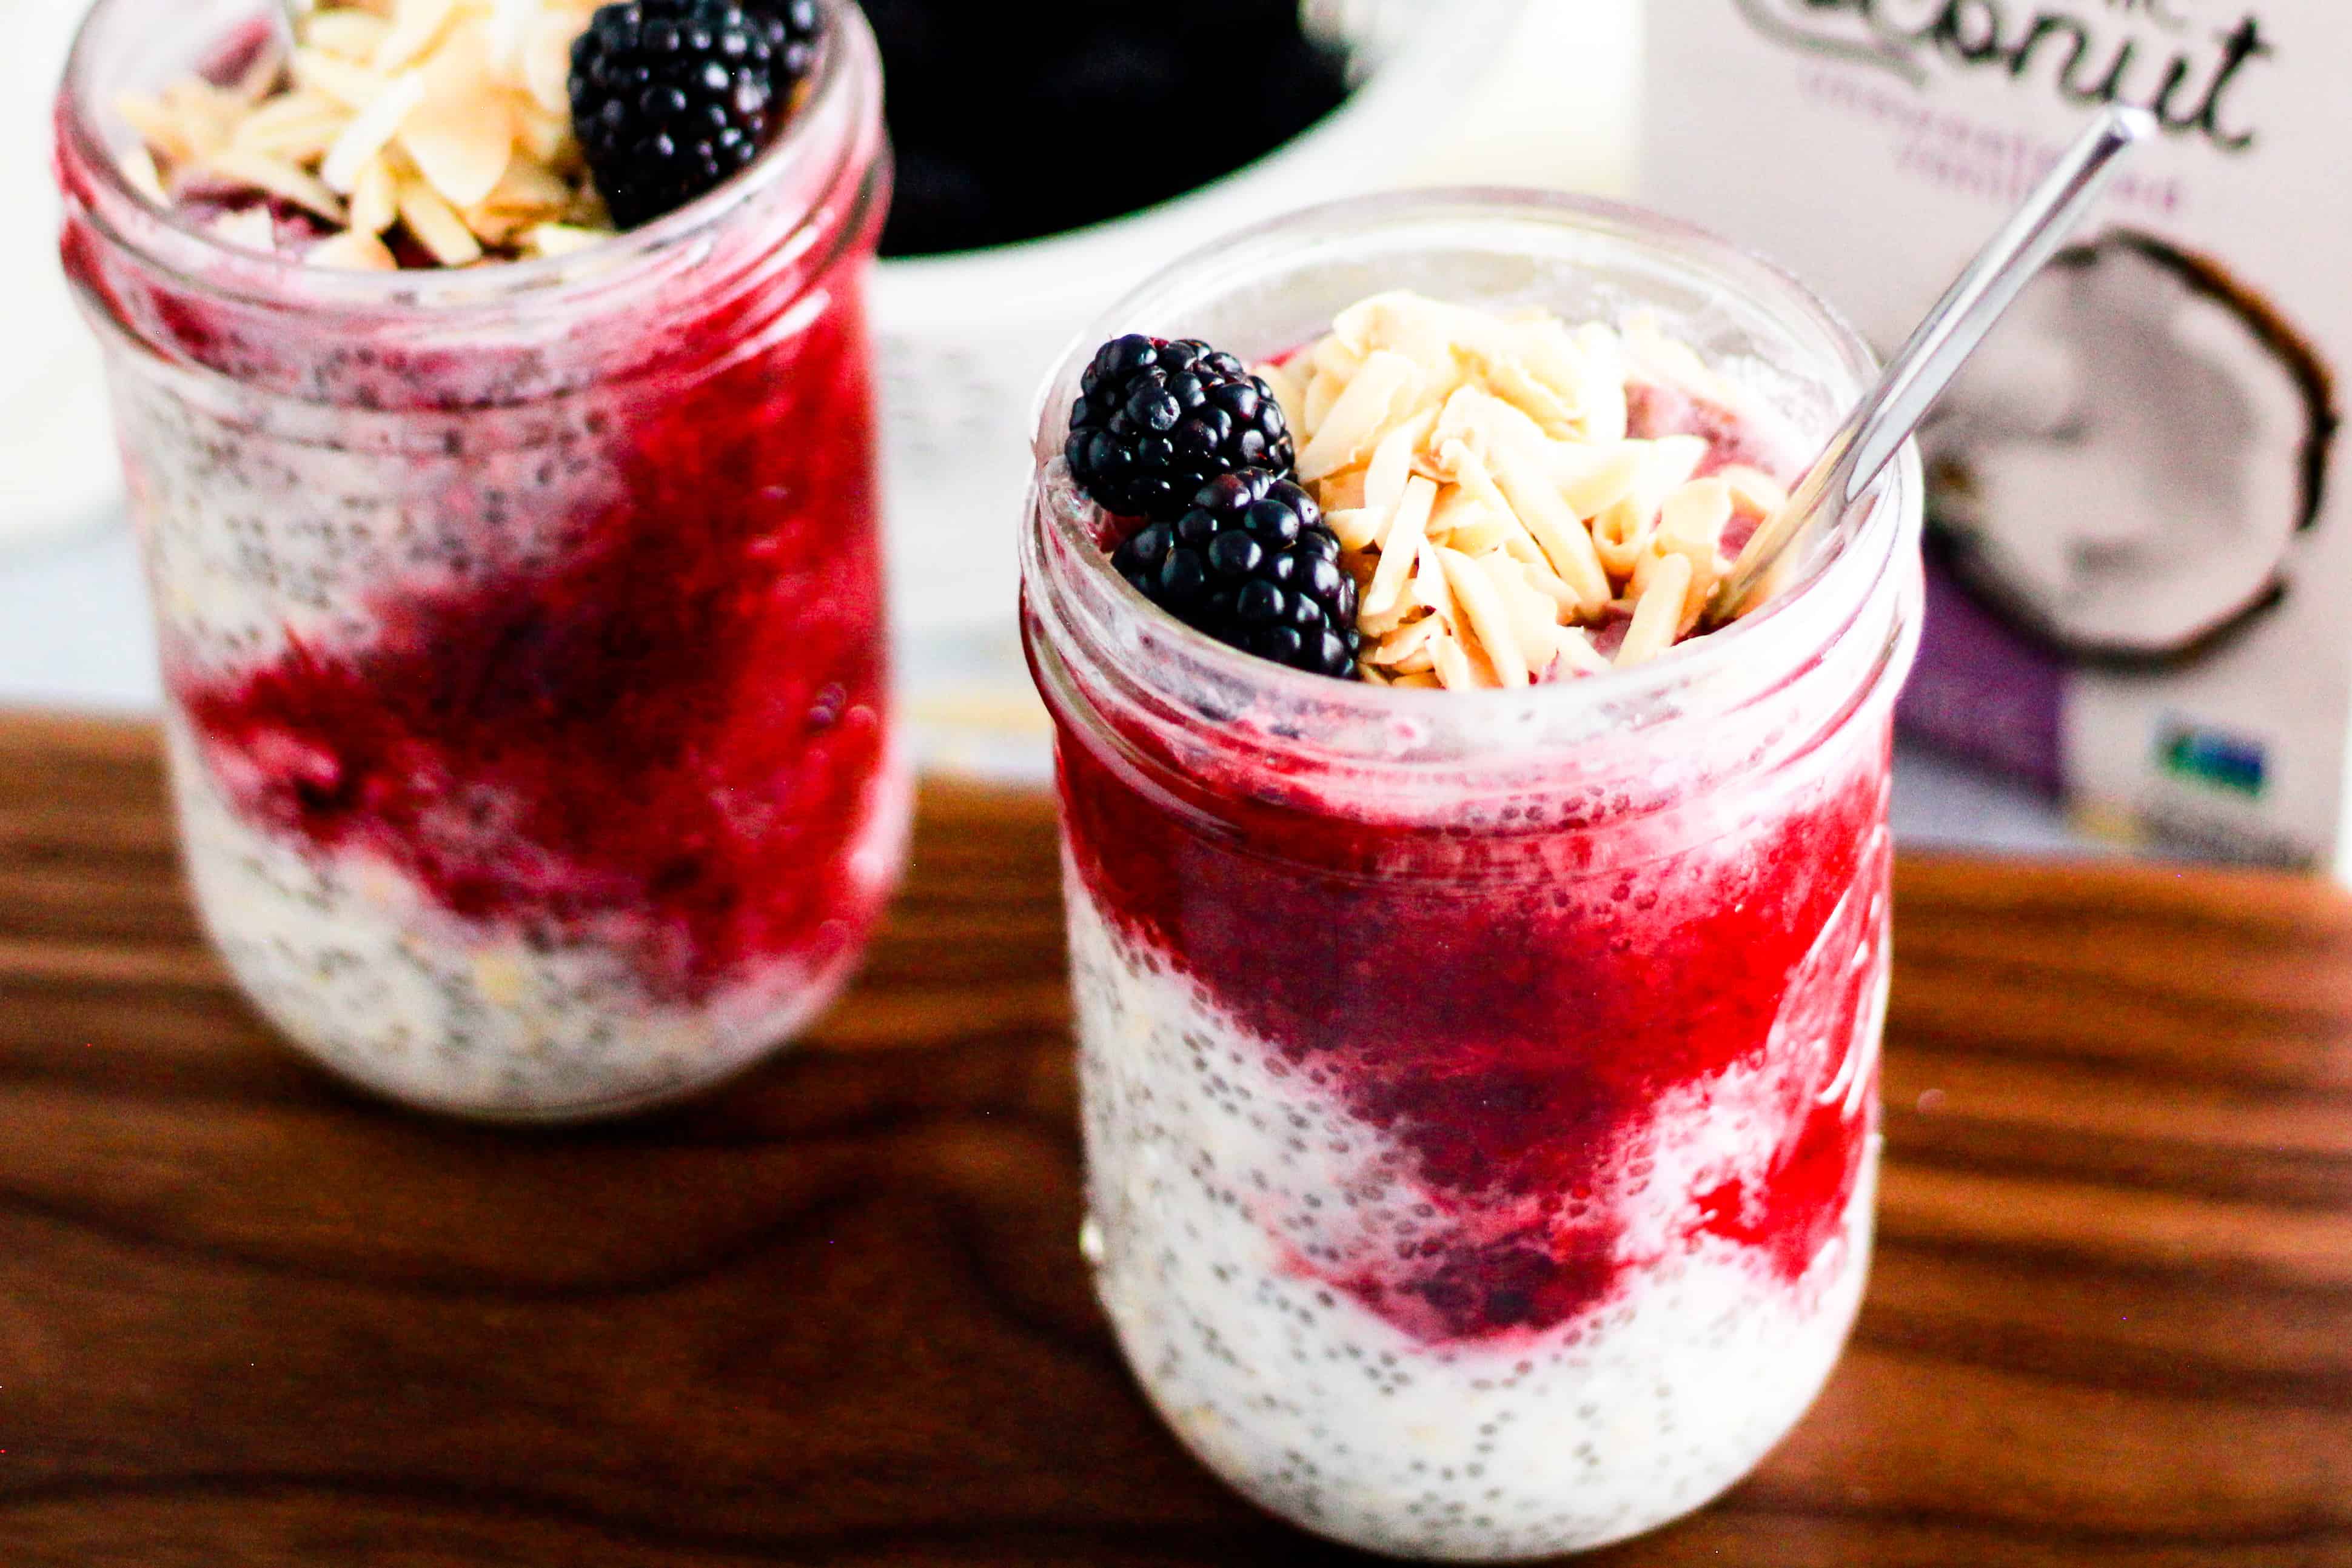 Jars of overnight oats with blackberries and carton of So Delicious Coconutmilk.